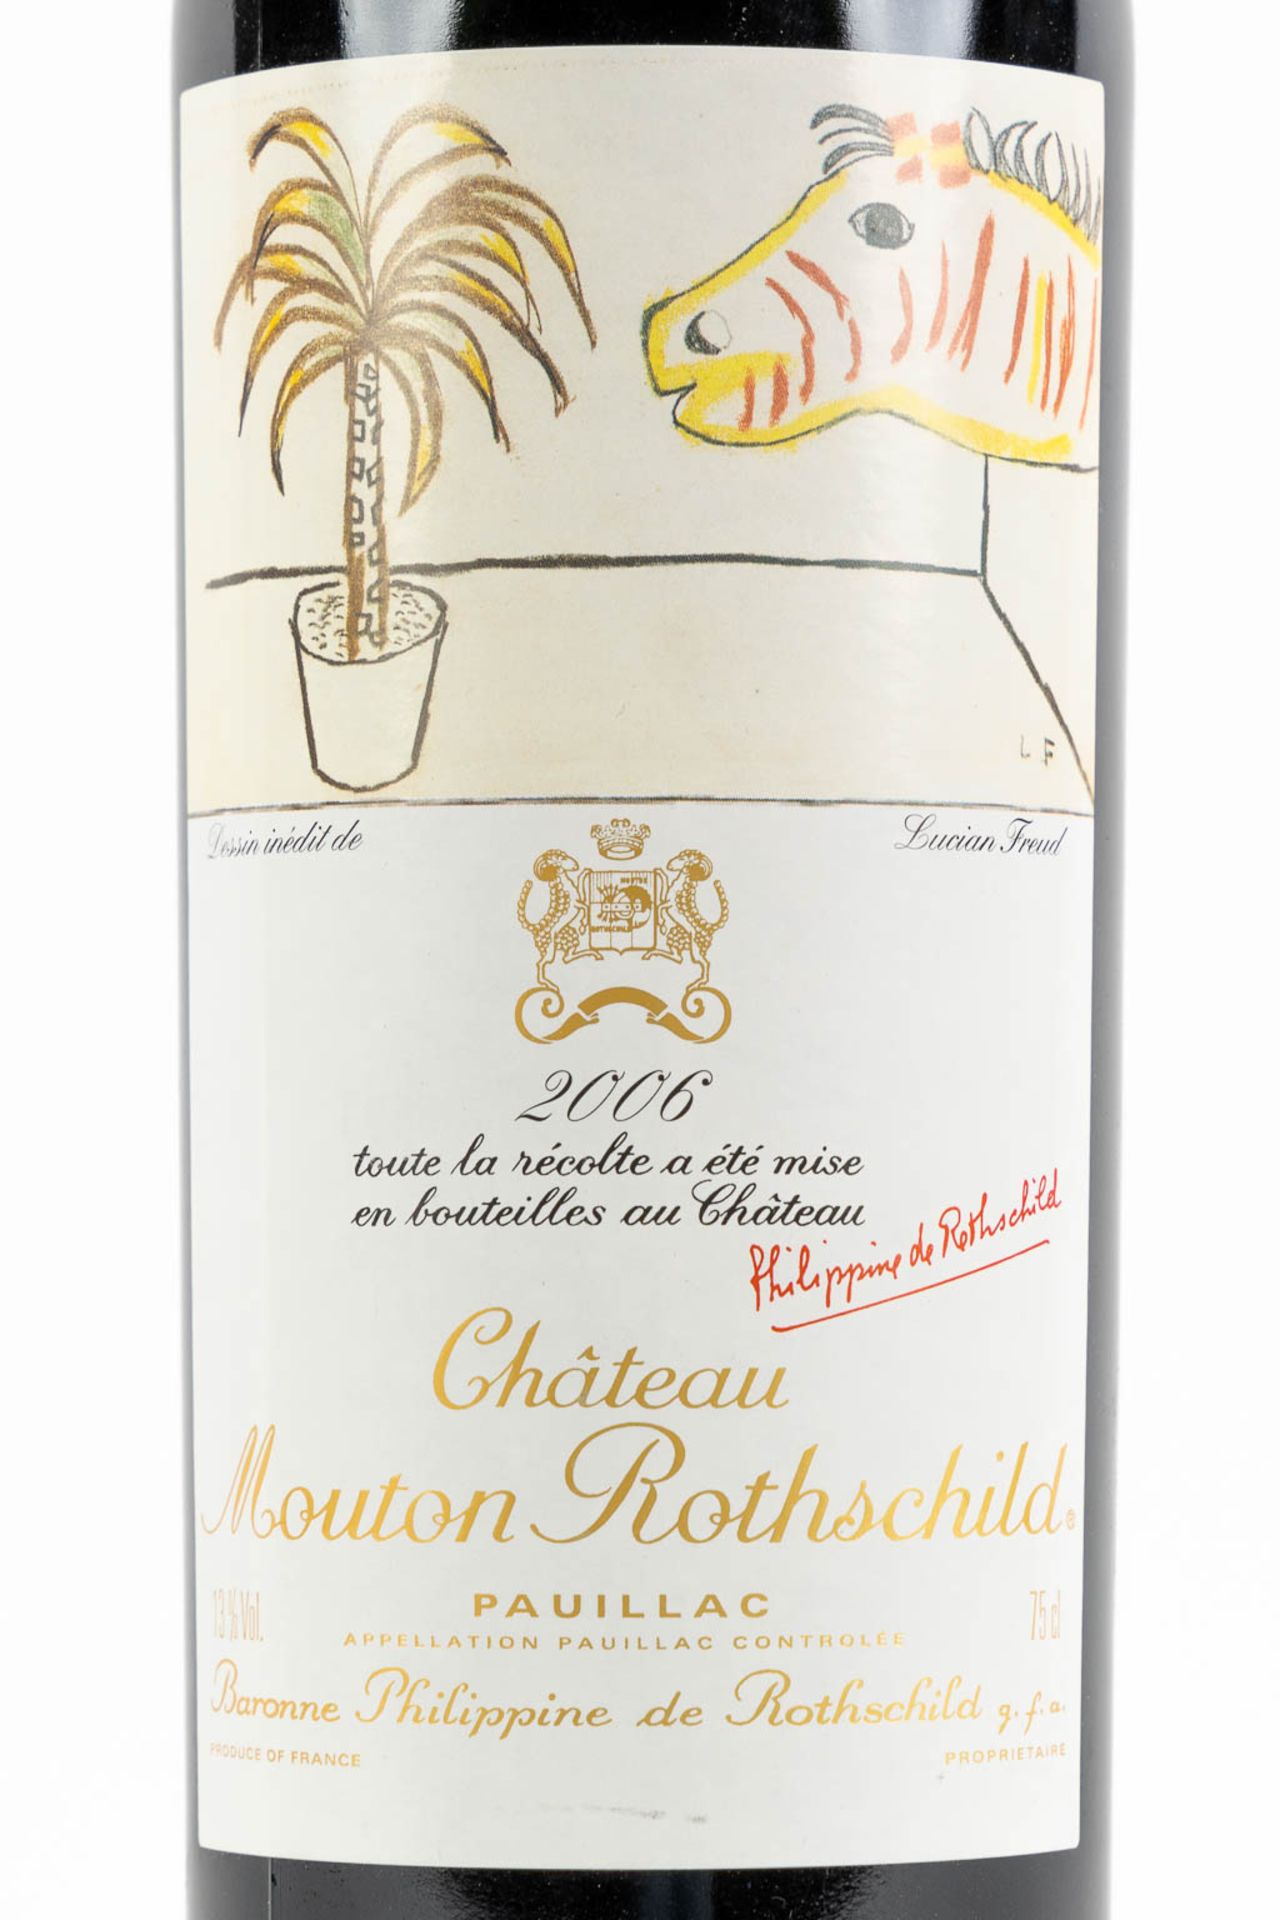 2006 Château Mouton Rothschild, Lucian Freud - Image 2 of 3